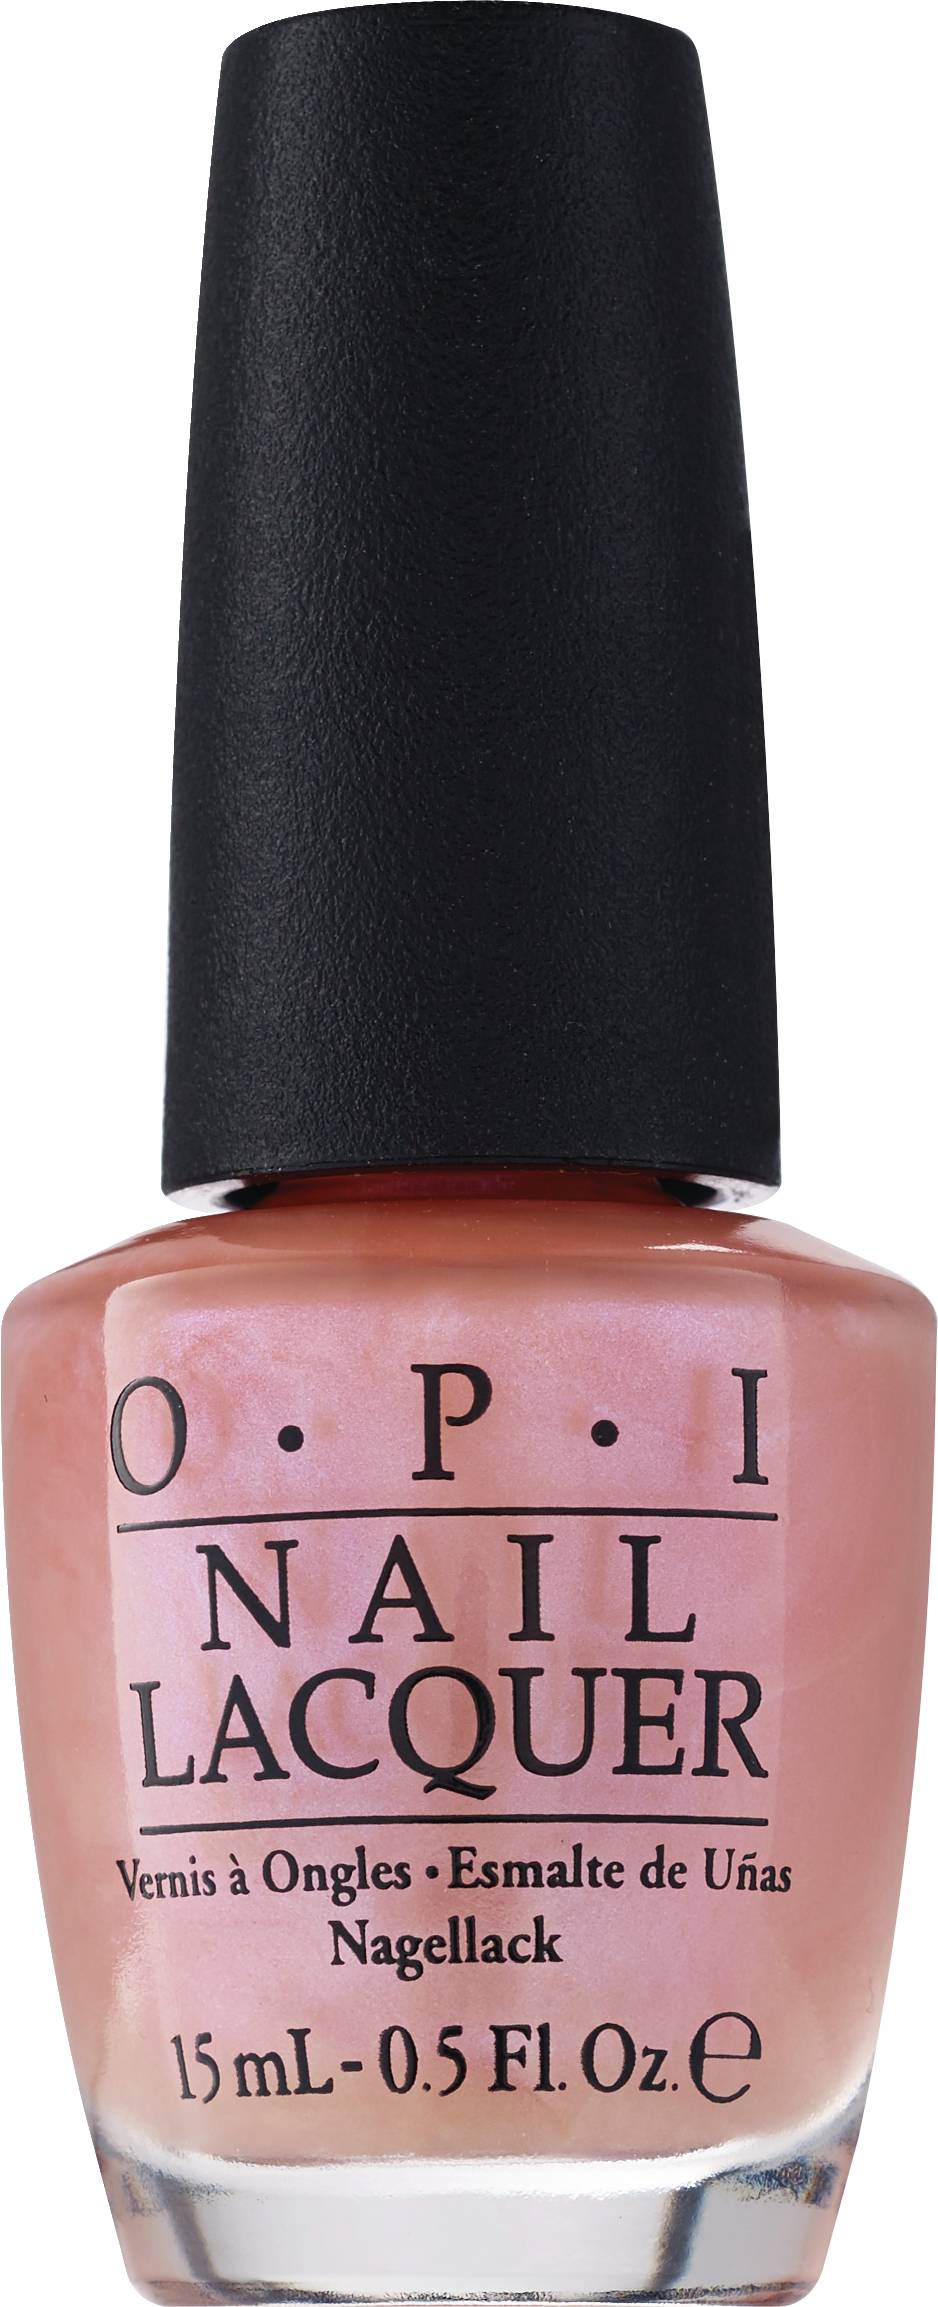 OPI Nail Lacquer, Passion